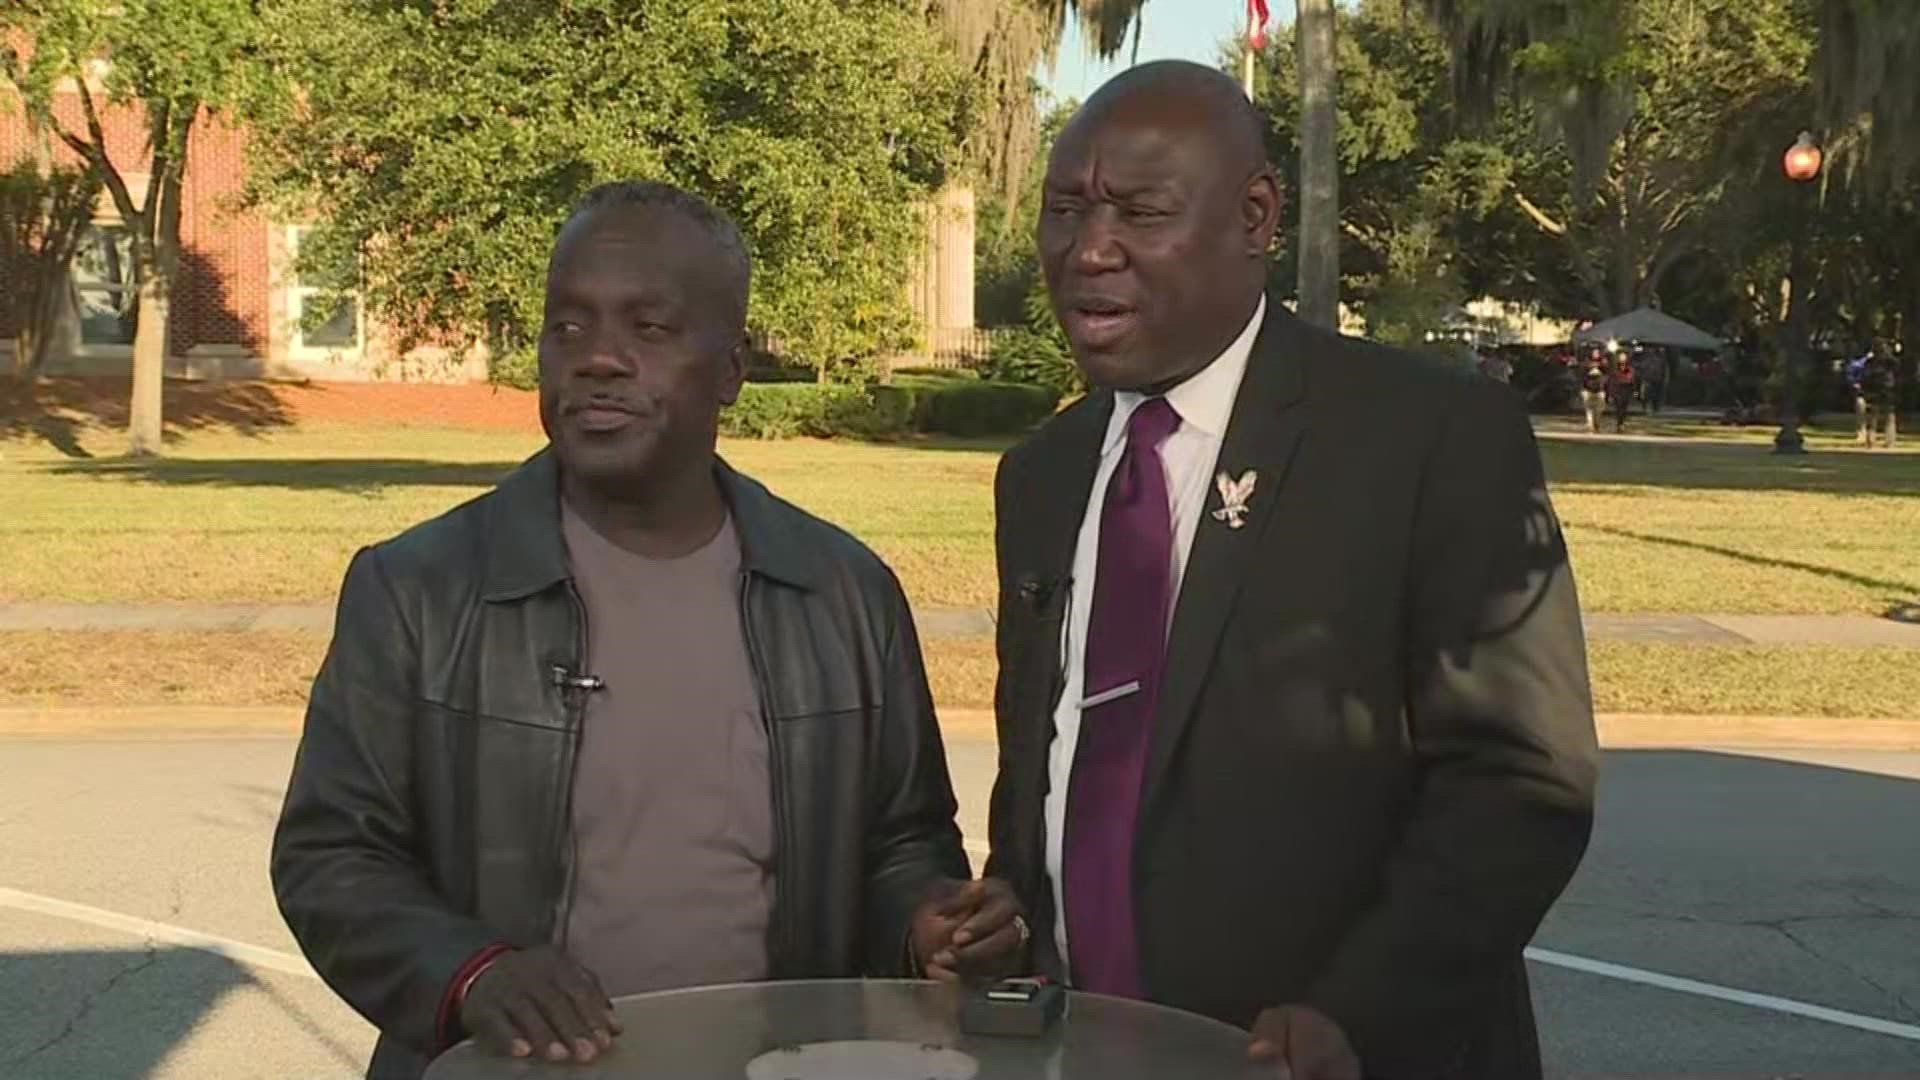 Attorney Benjamin Crump explains that his client felt gut-wrenching emotion.